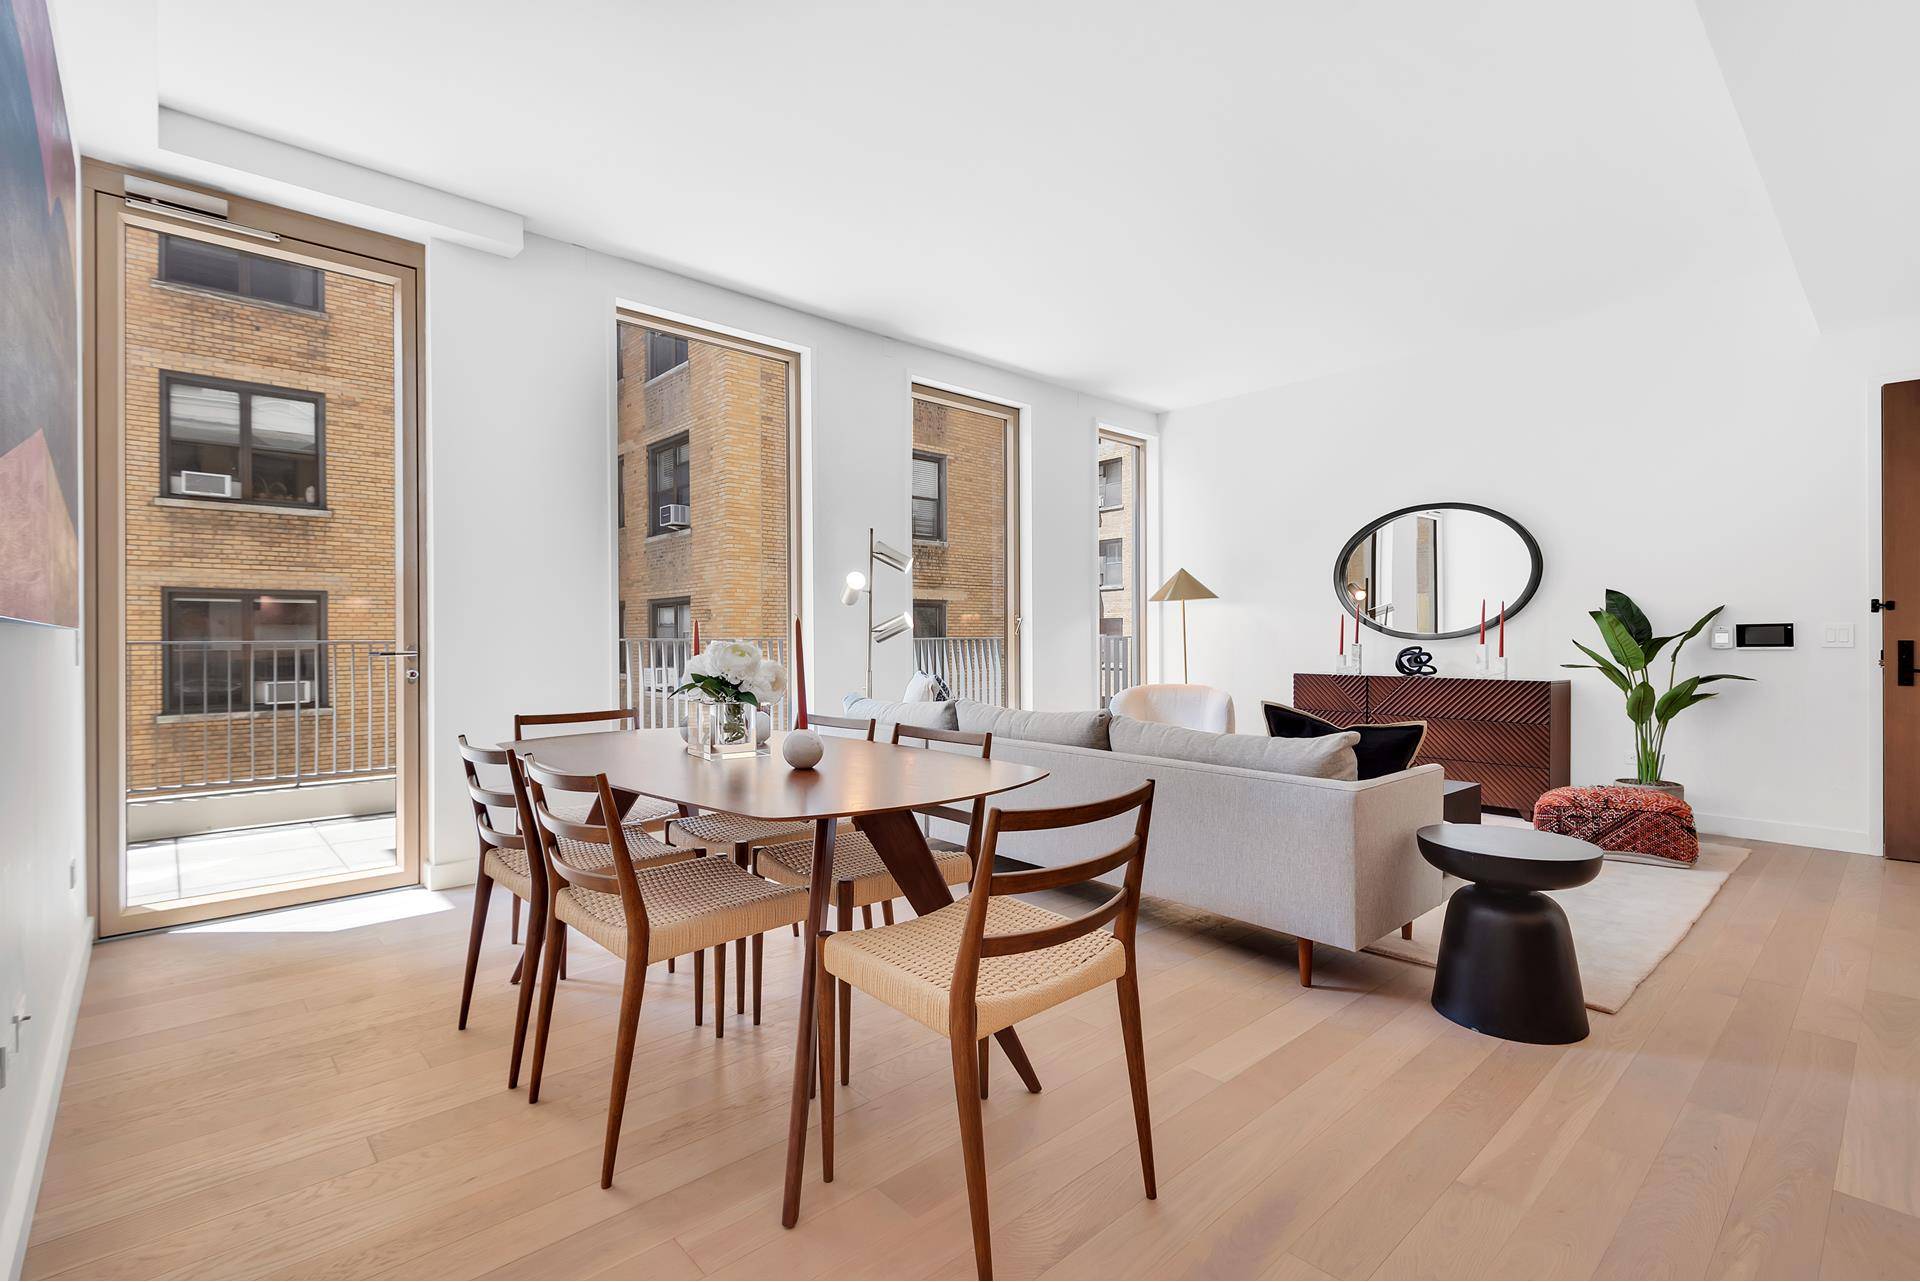 Spanning 1, 093 square feet, Residence 7B at 212W93 is an elegant two bedroom, two bathroom home with interiors designed by GRADE New York.